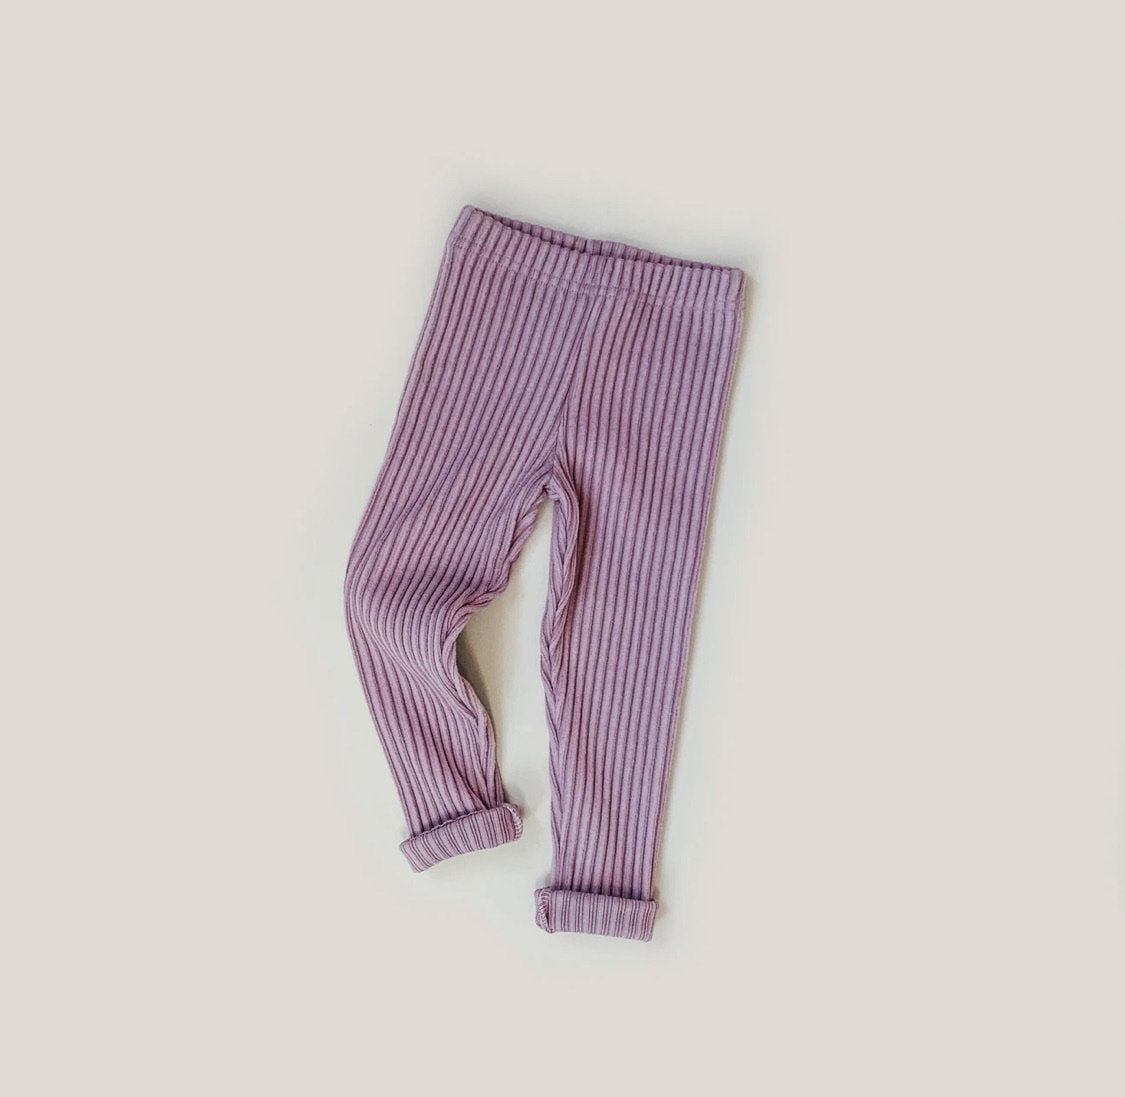 Tayo Rib Leggings find Stylish Fashion for Little People- at Little Foxx Concept Store